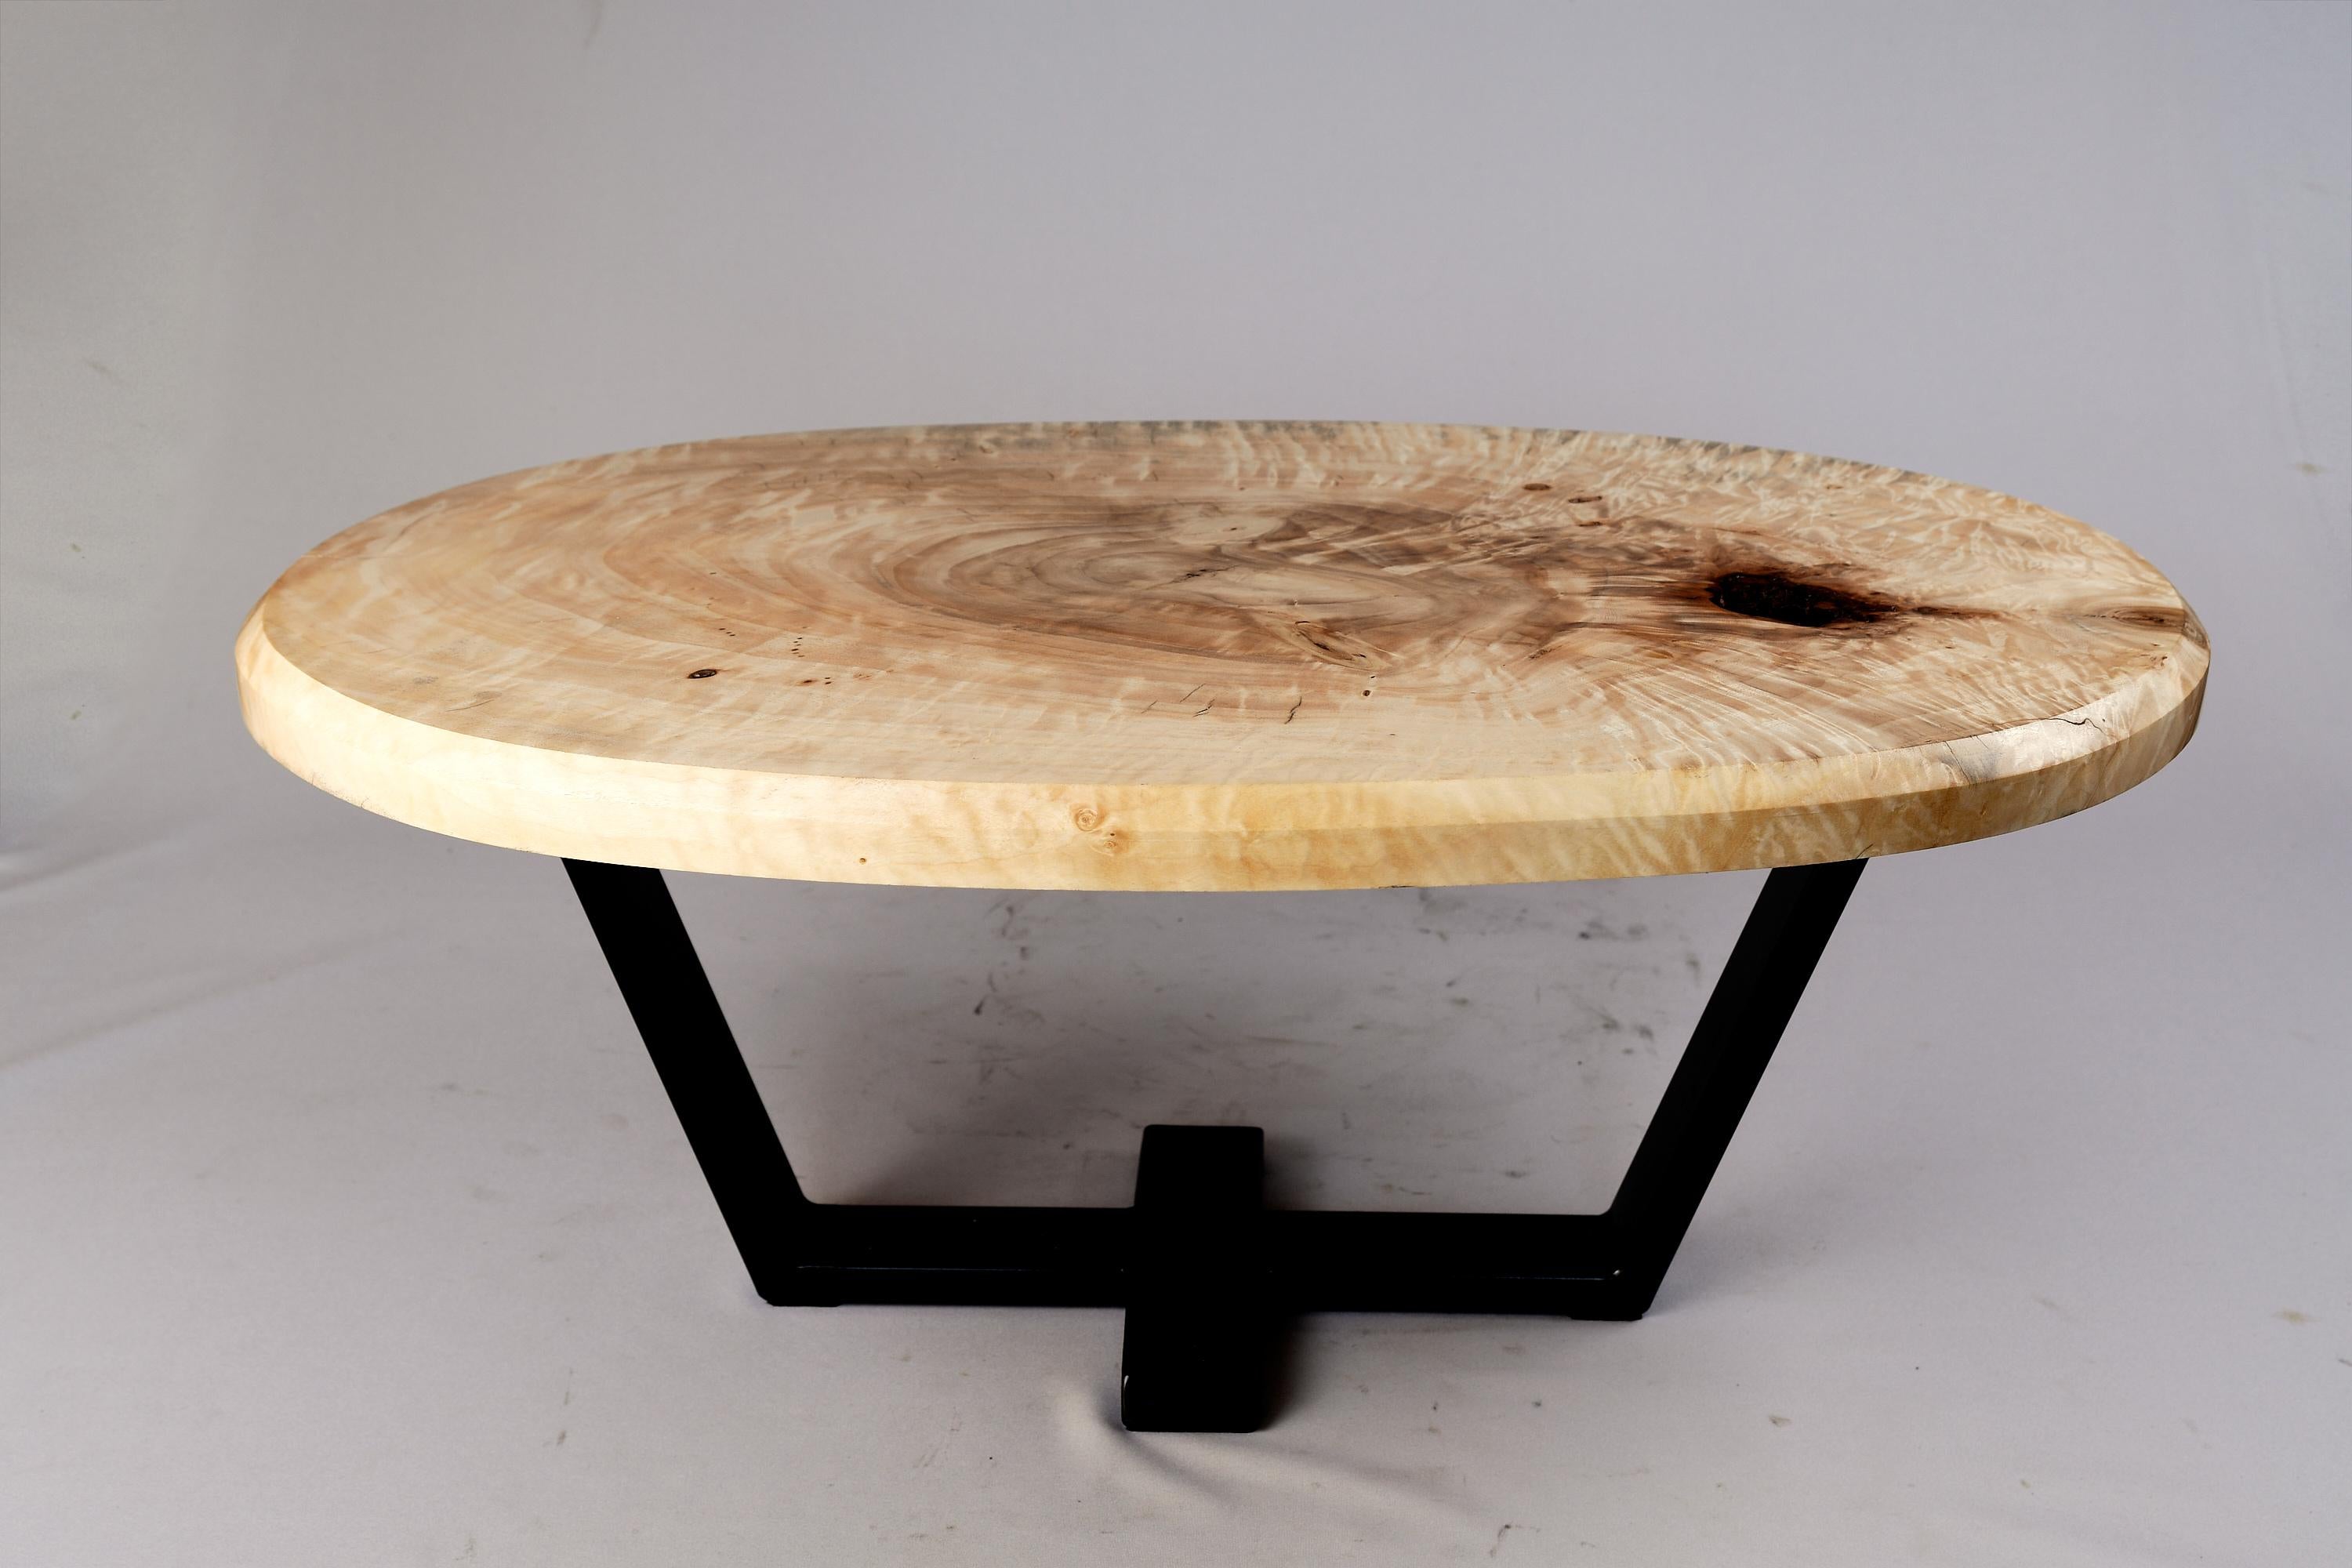 Unique and decorative side table. It is build in combination of wood & steel, and protected with the highest quality oils, ensuring durability for generations. Such unique handmade design will highlight your interior and bring comfort to your